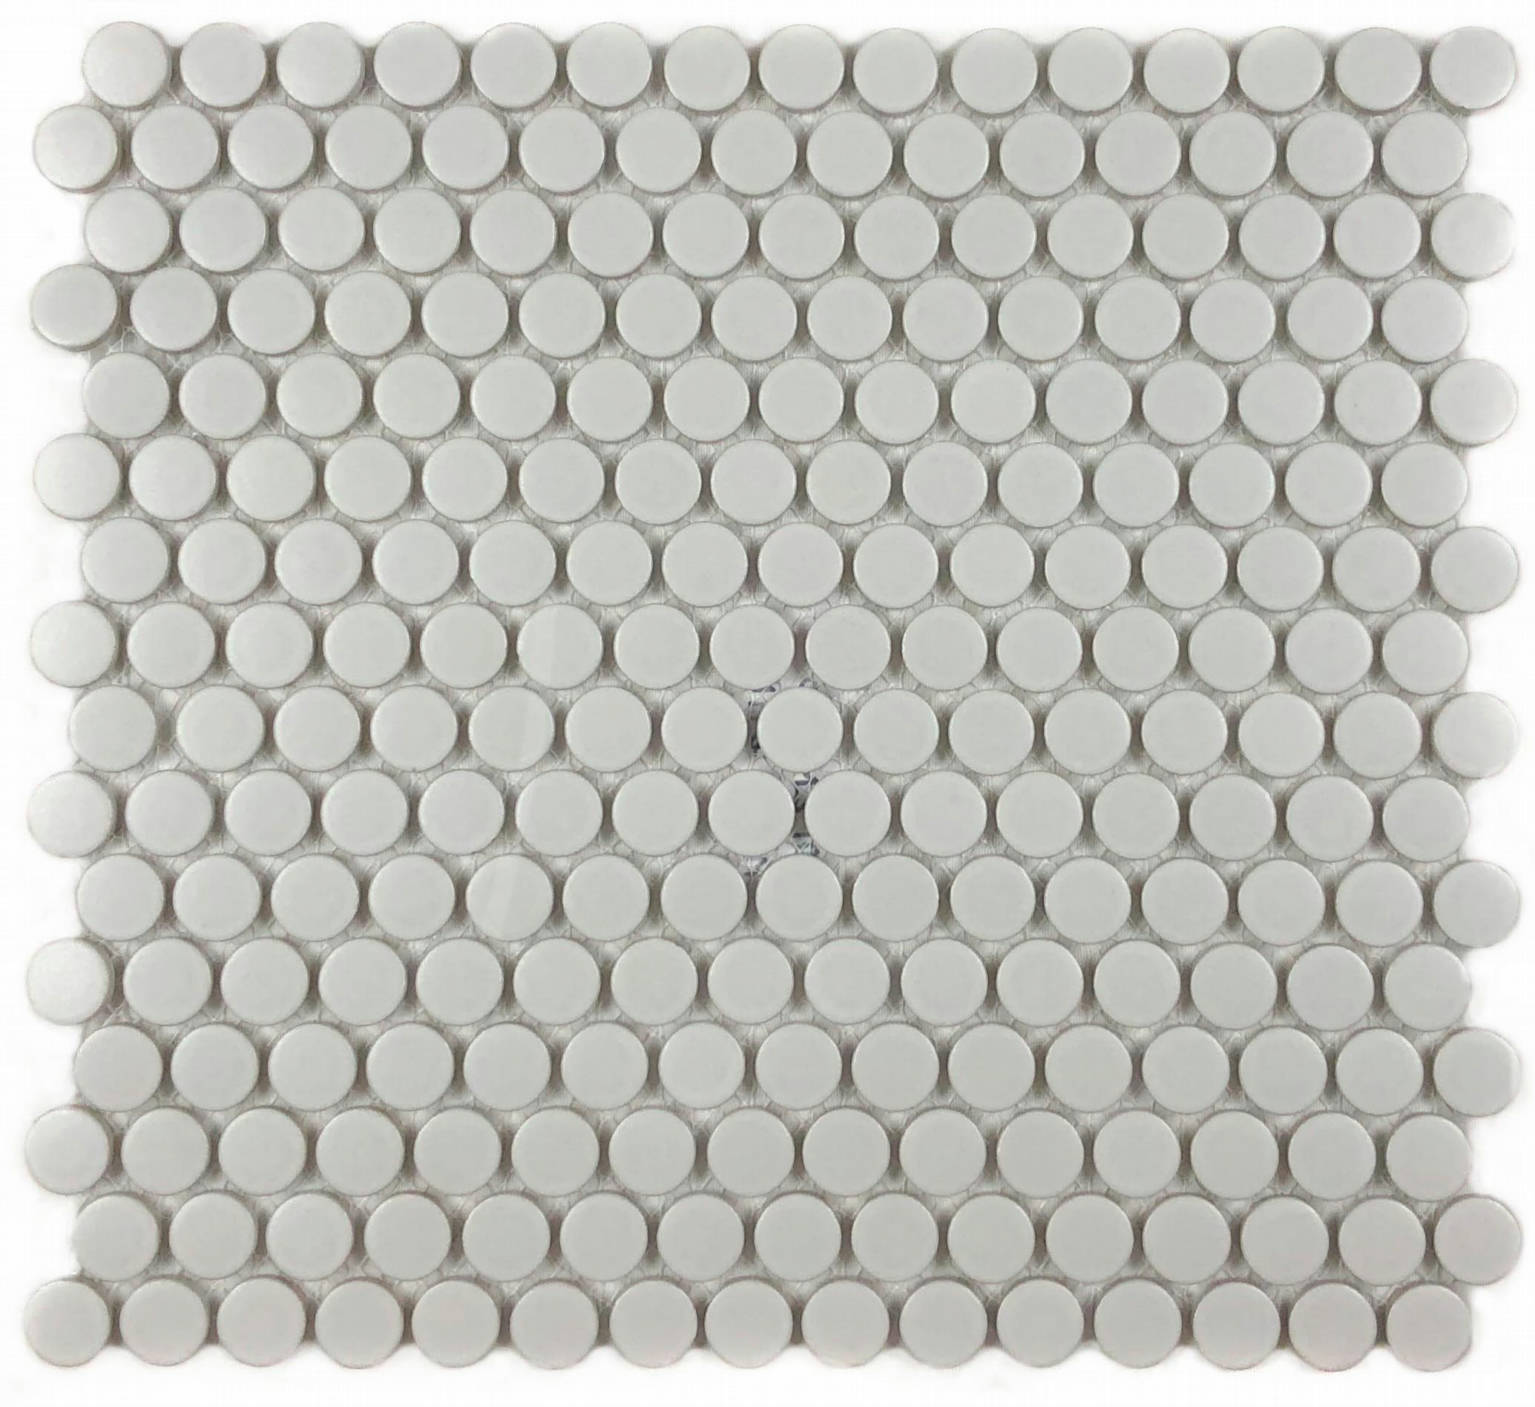 Penny Rounds ¾” White Matte | Adex USA